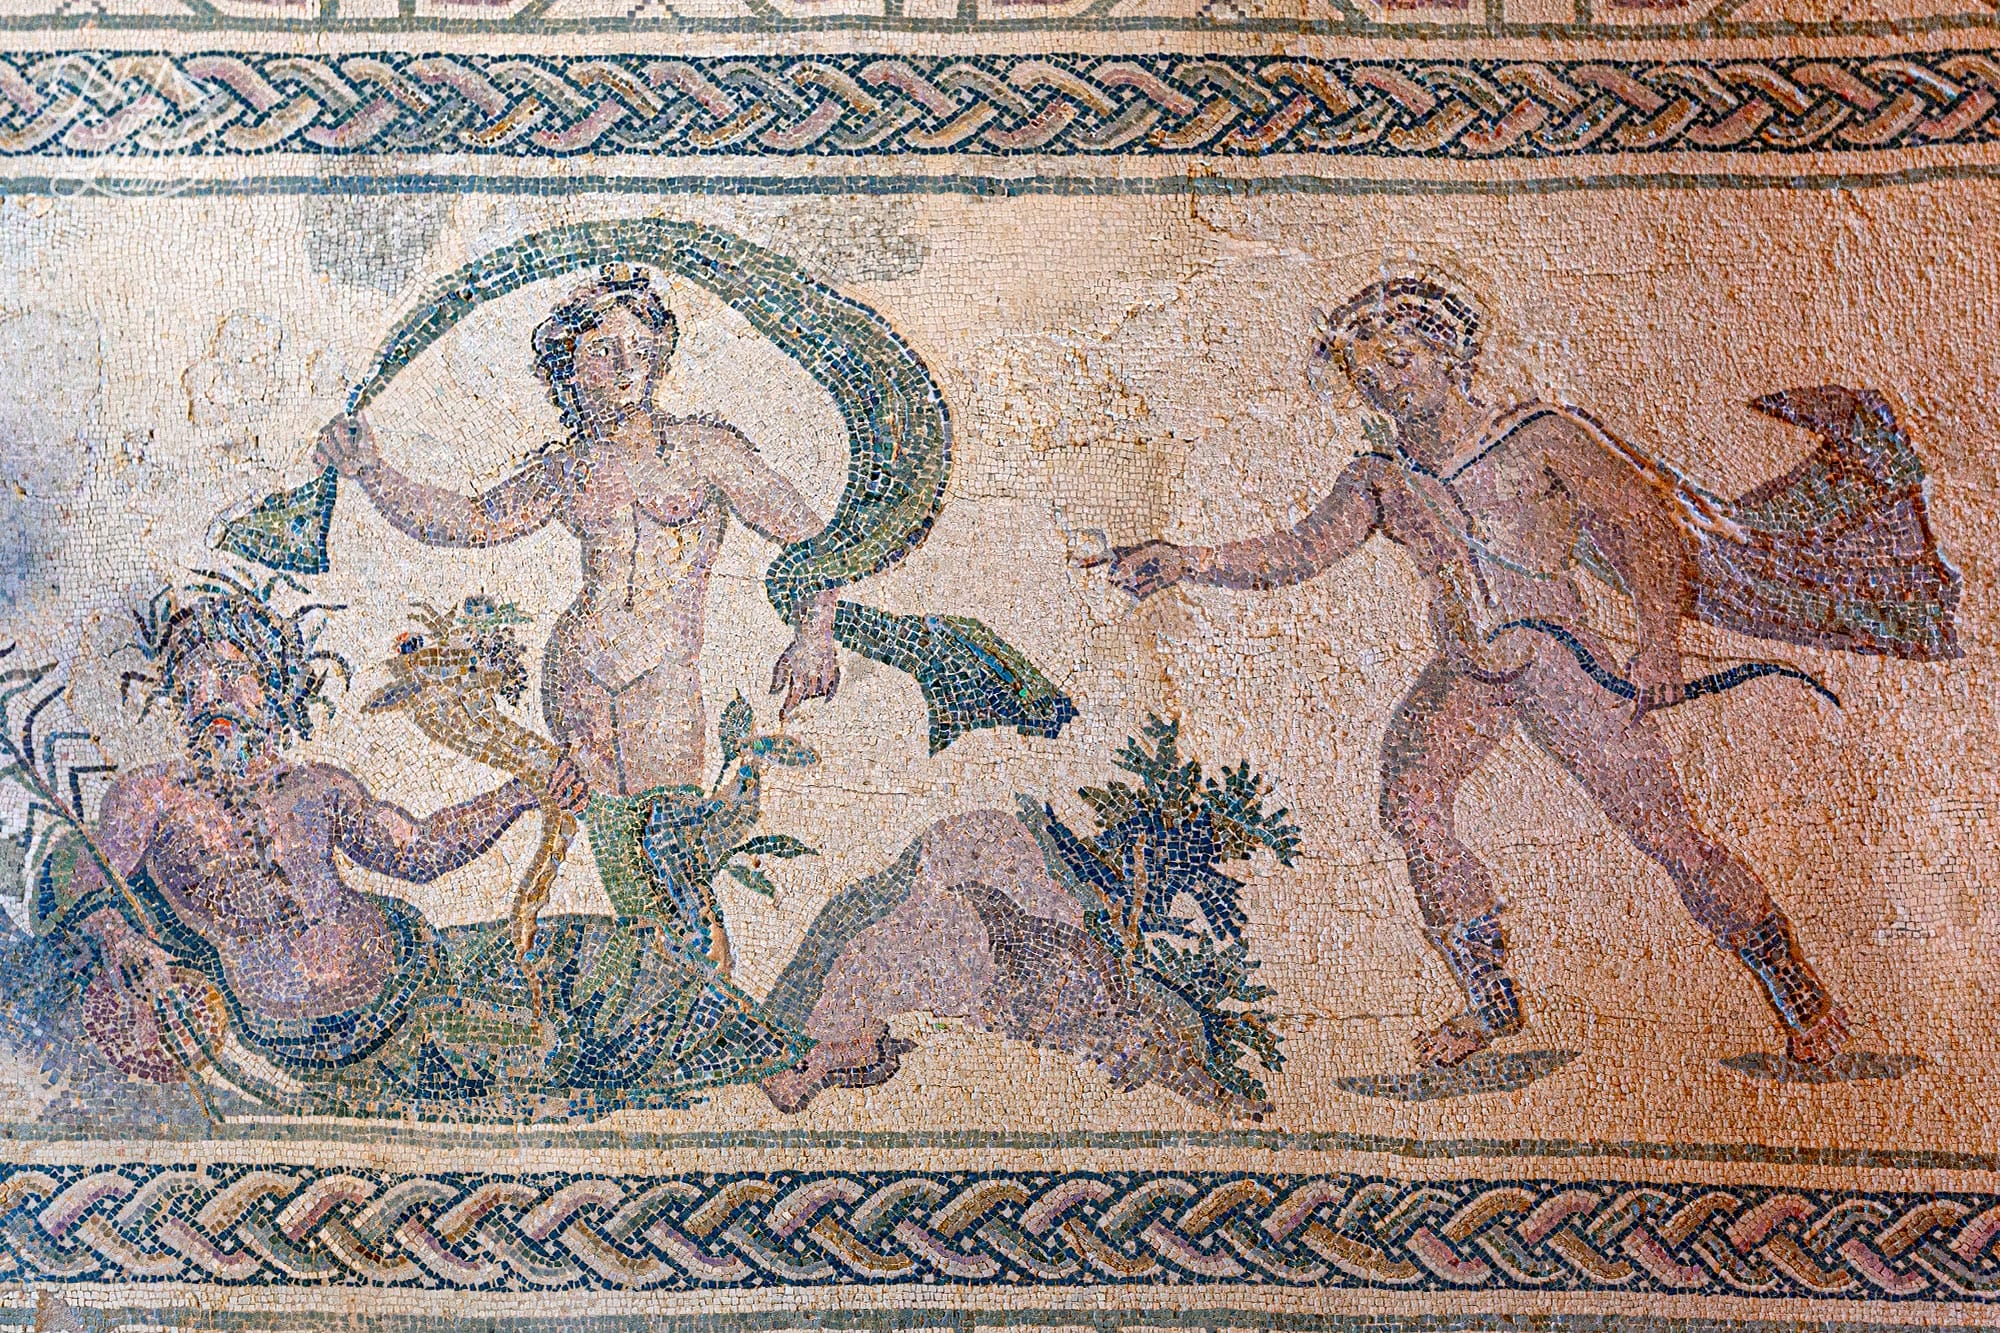 Mosaic of Apollo and Daphne in the House of Dionysos in the Paphos Archaeological Park Paphos Cyprus